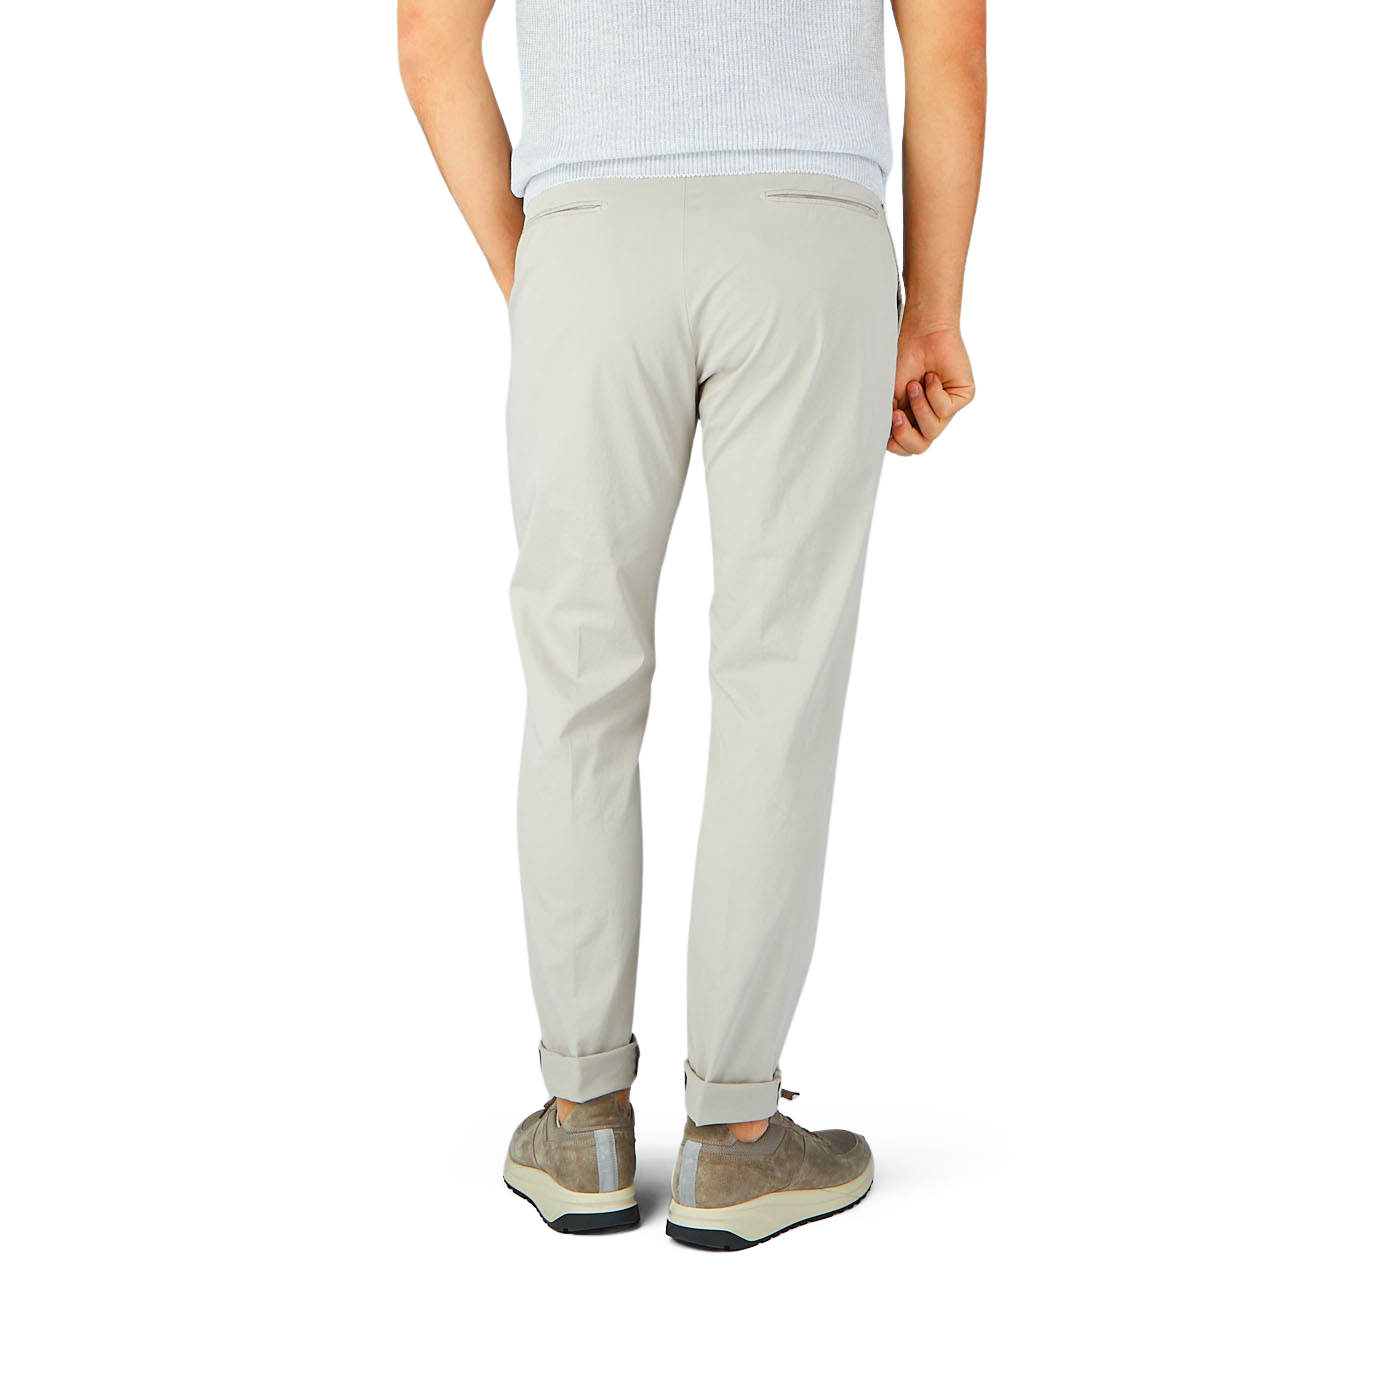 The back of a man wearing Briglia Light Beige Cotton Stretch BG07 Pleated Chinos.